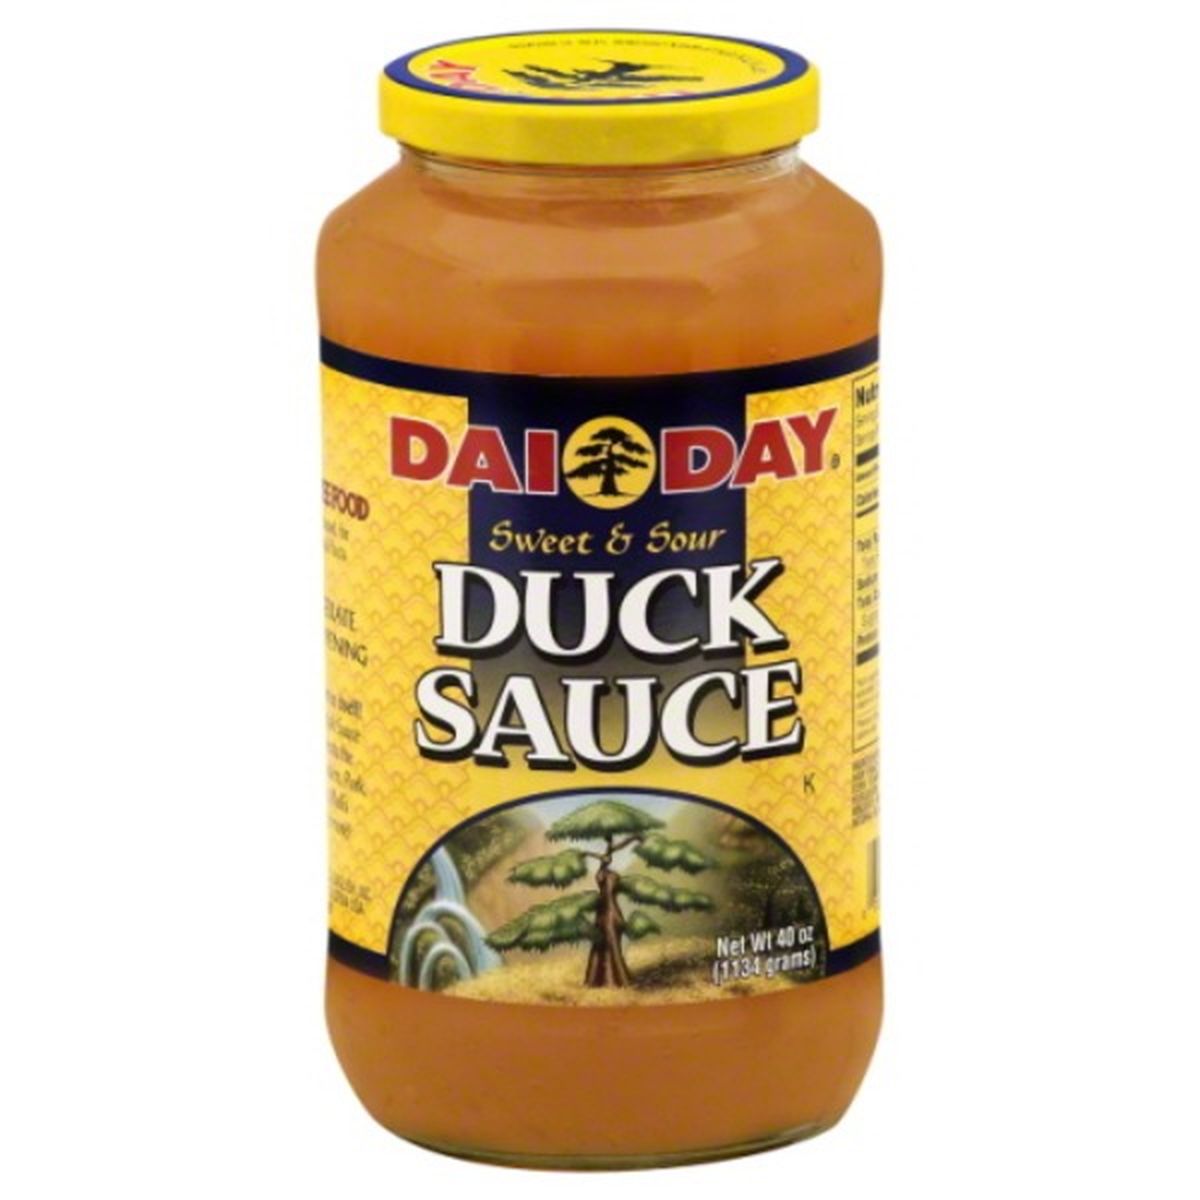 Calories in Dai Day Duck Sauce